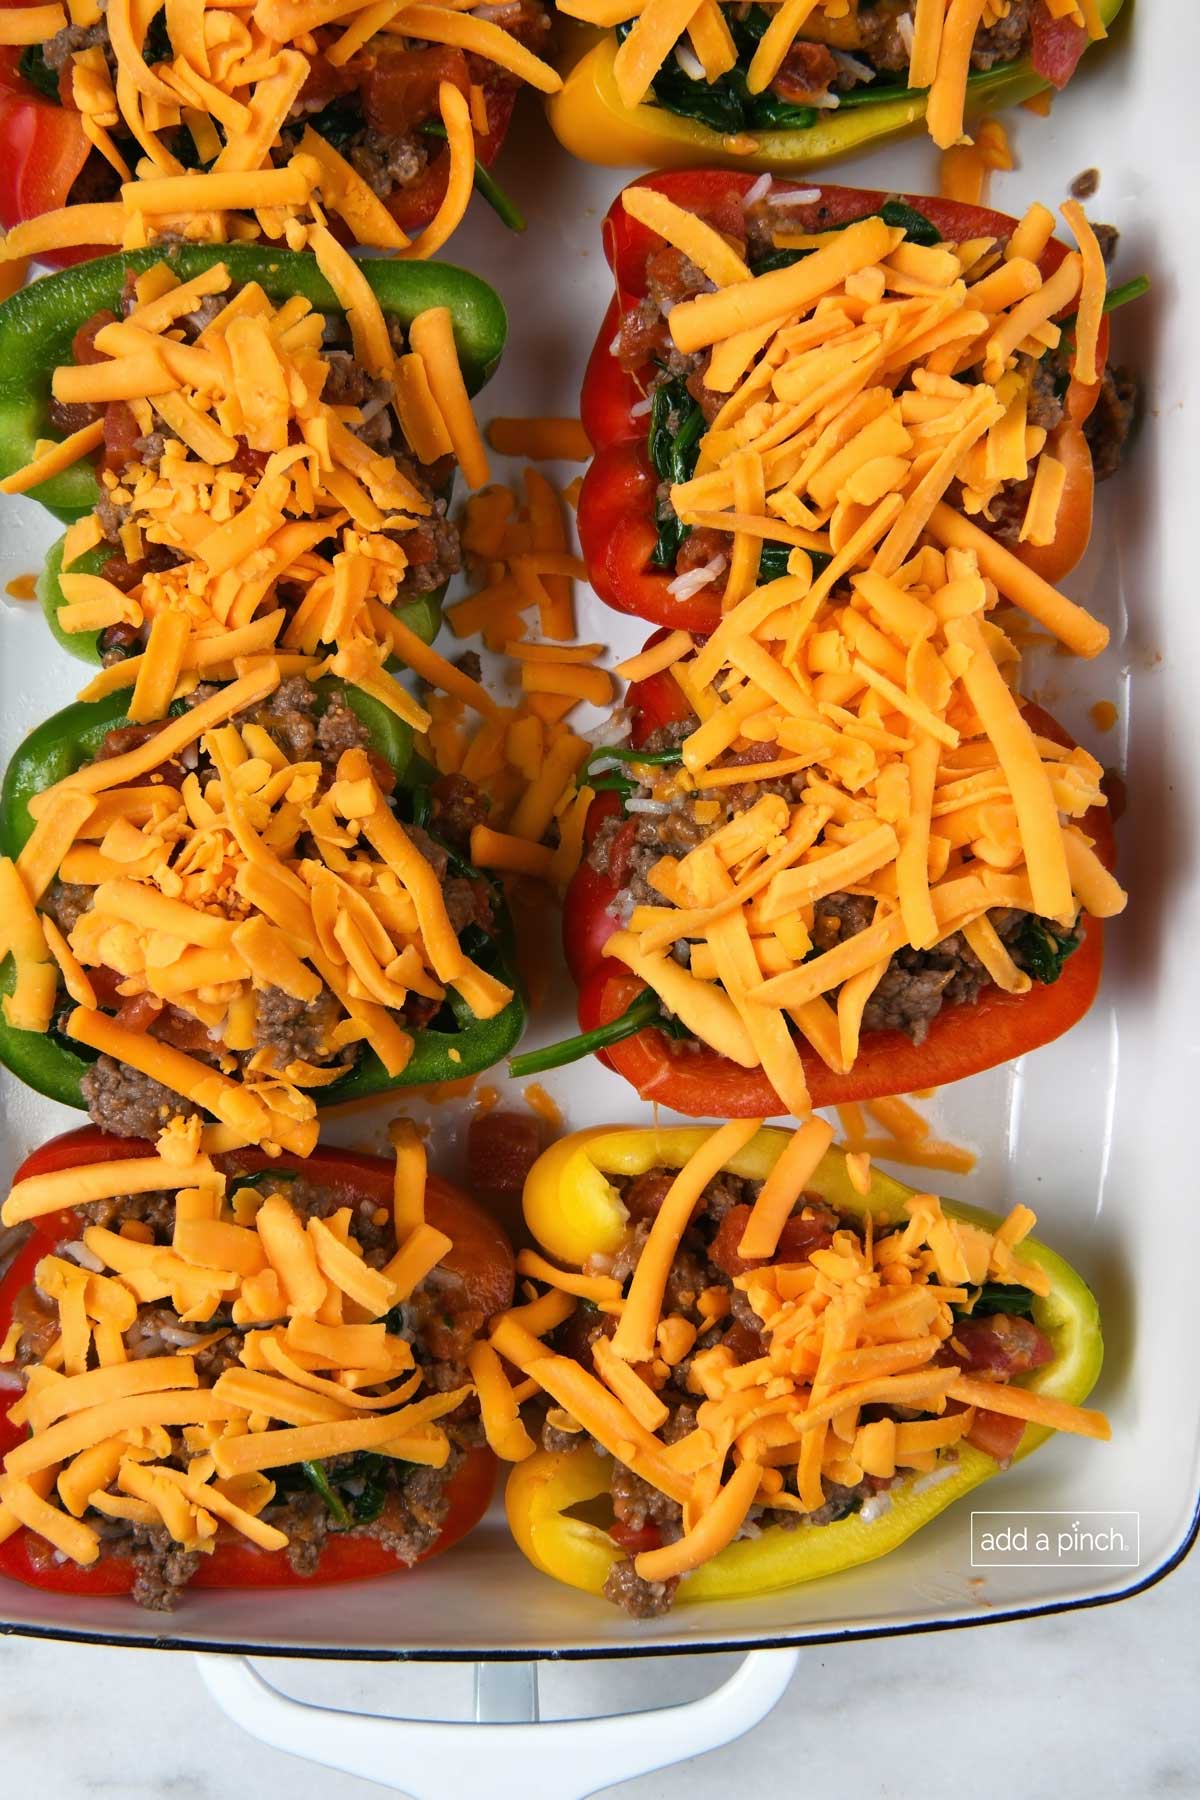 Shredded cheddar cheese tops bell peppers stuffed with meat mixture before baking.